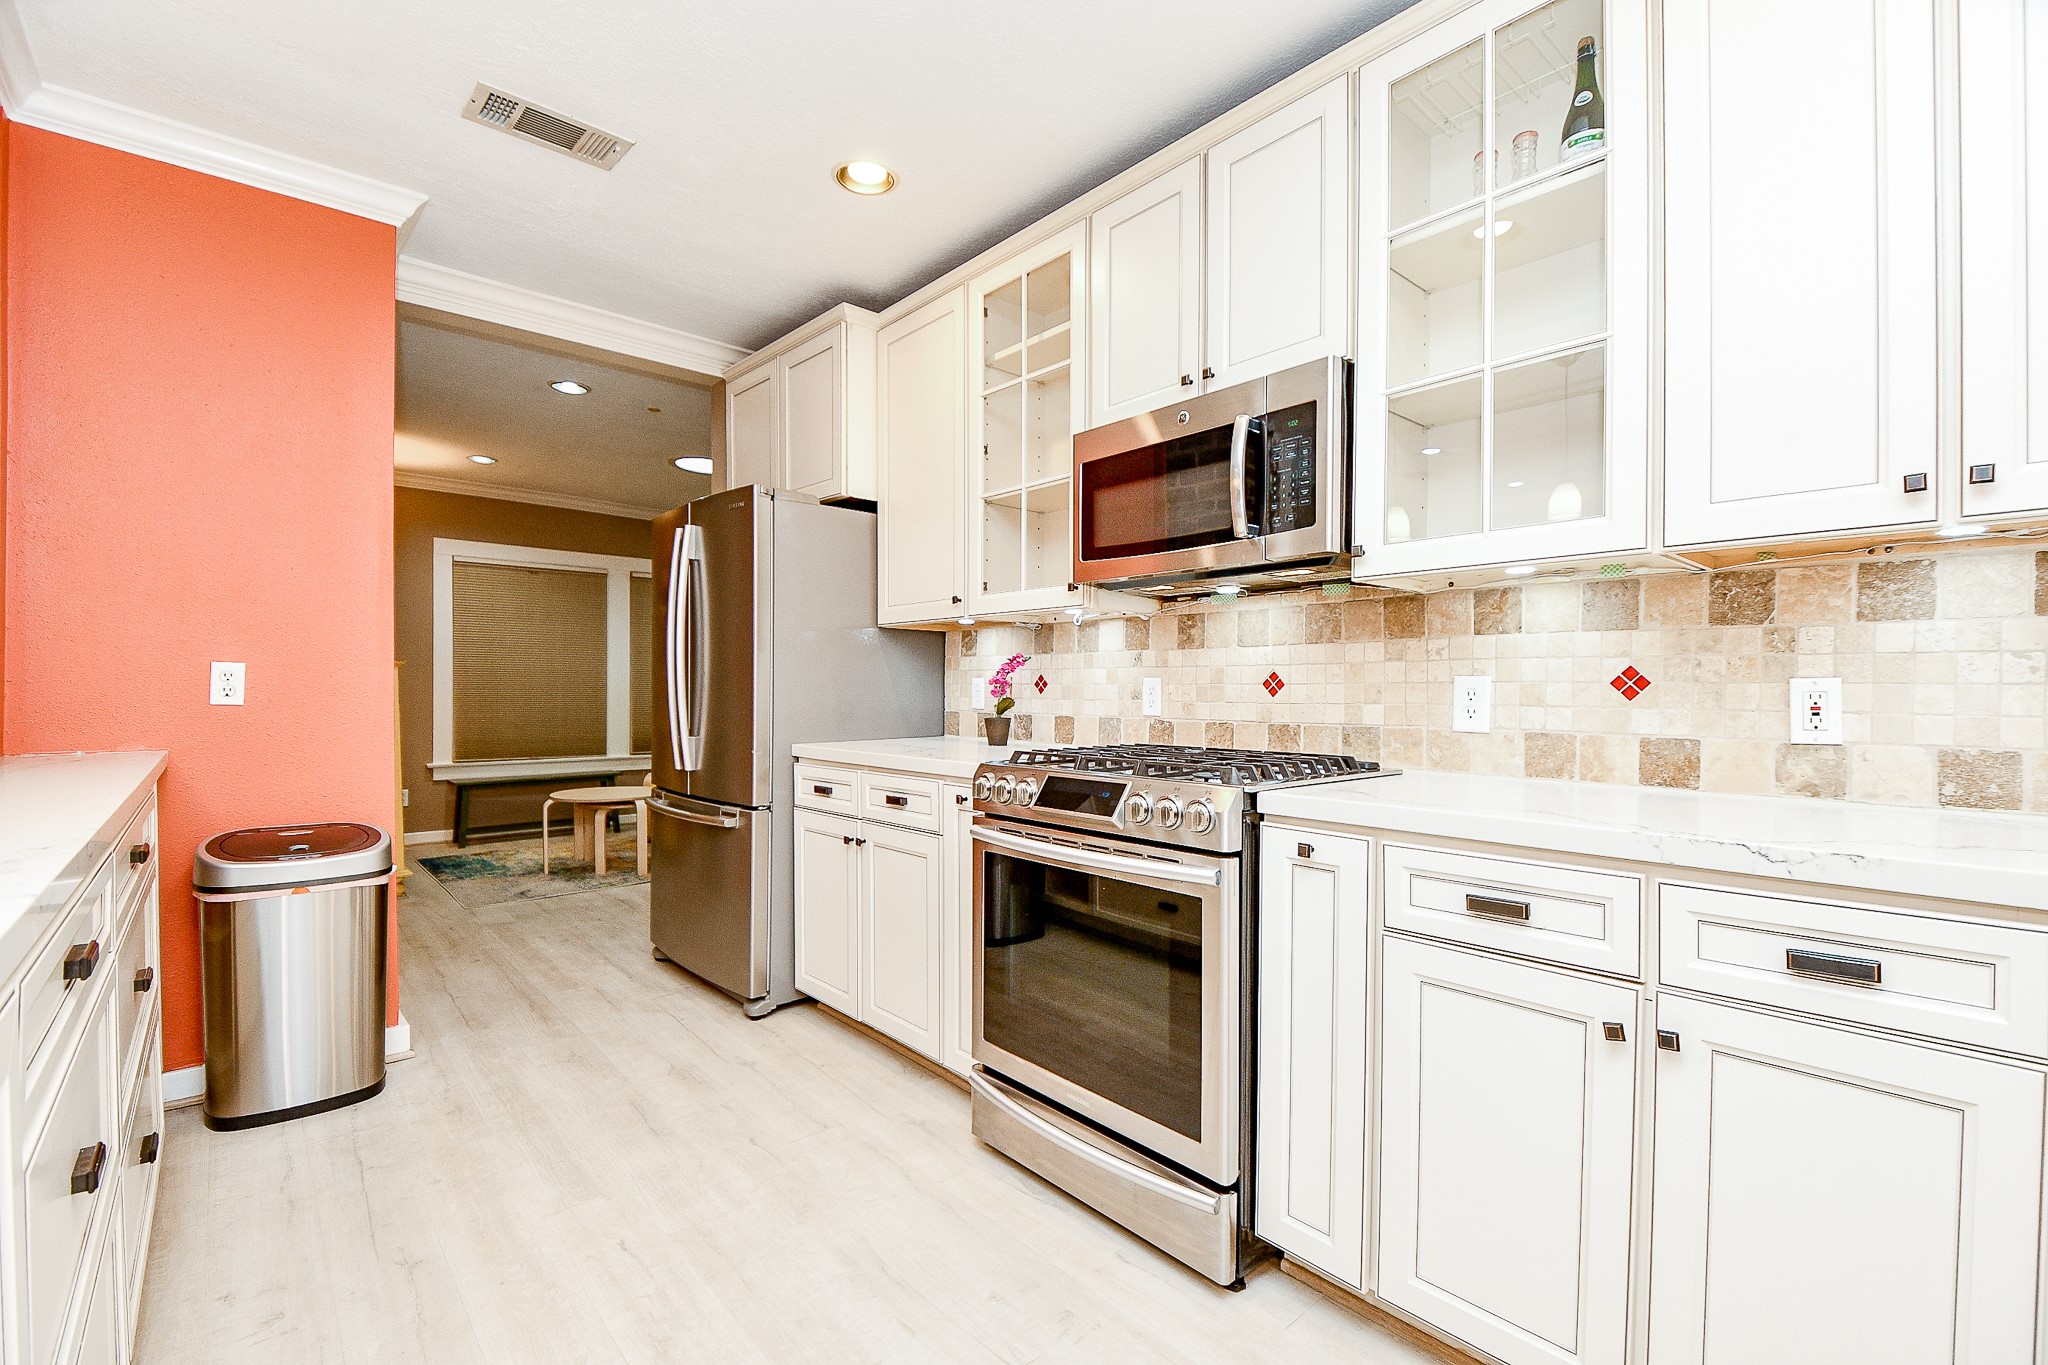 All stainless steel appliances with the refrigerator included!